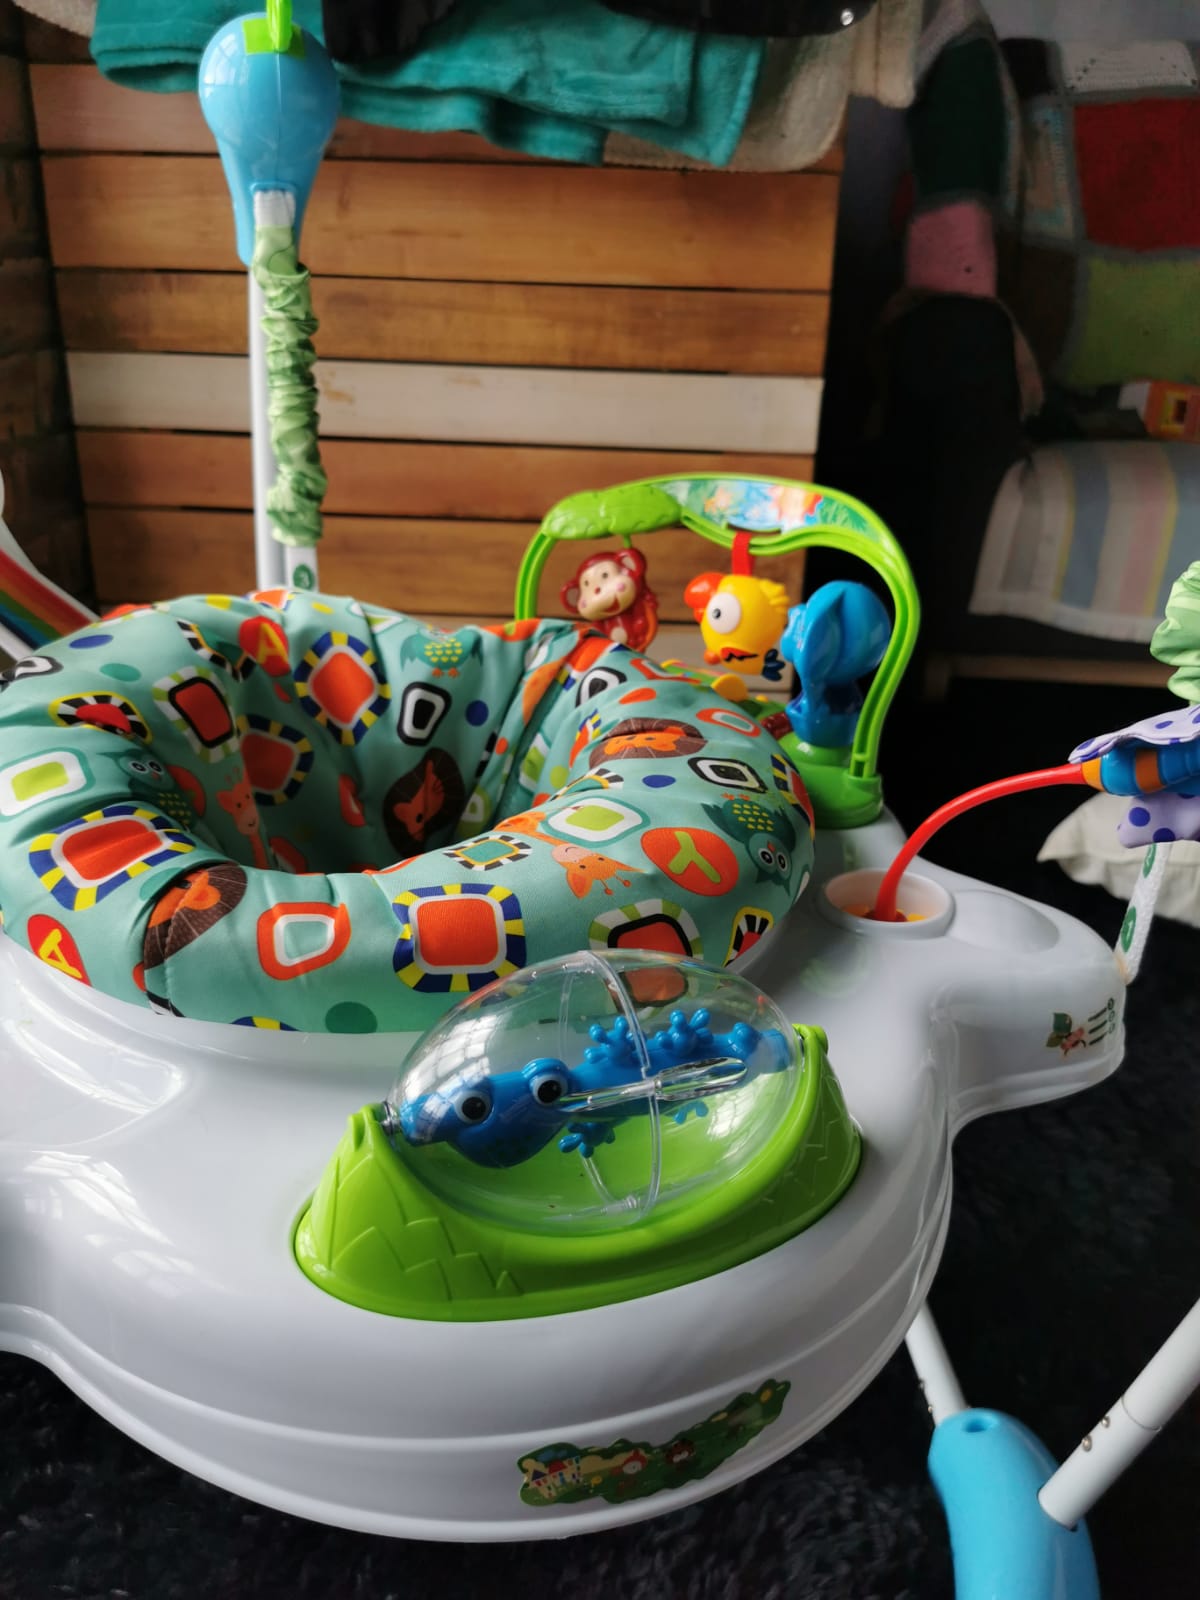 Jolly JumperBaby Bouncing Chair with Music.Height Can be adjusted.Seat can rotat